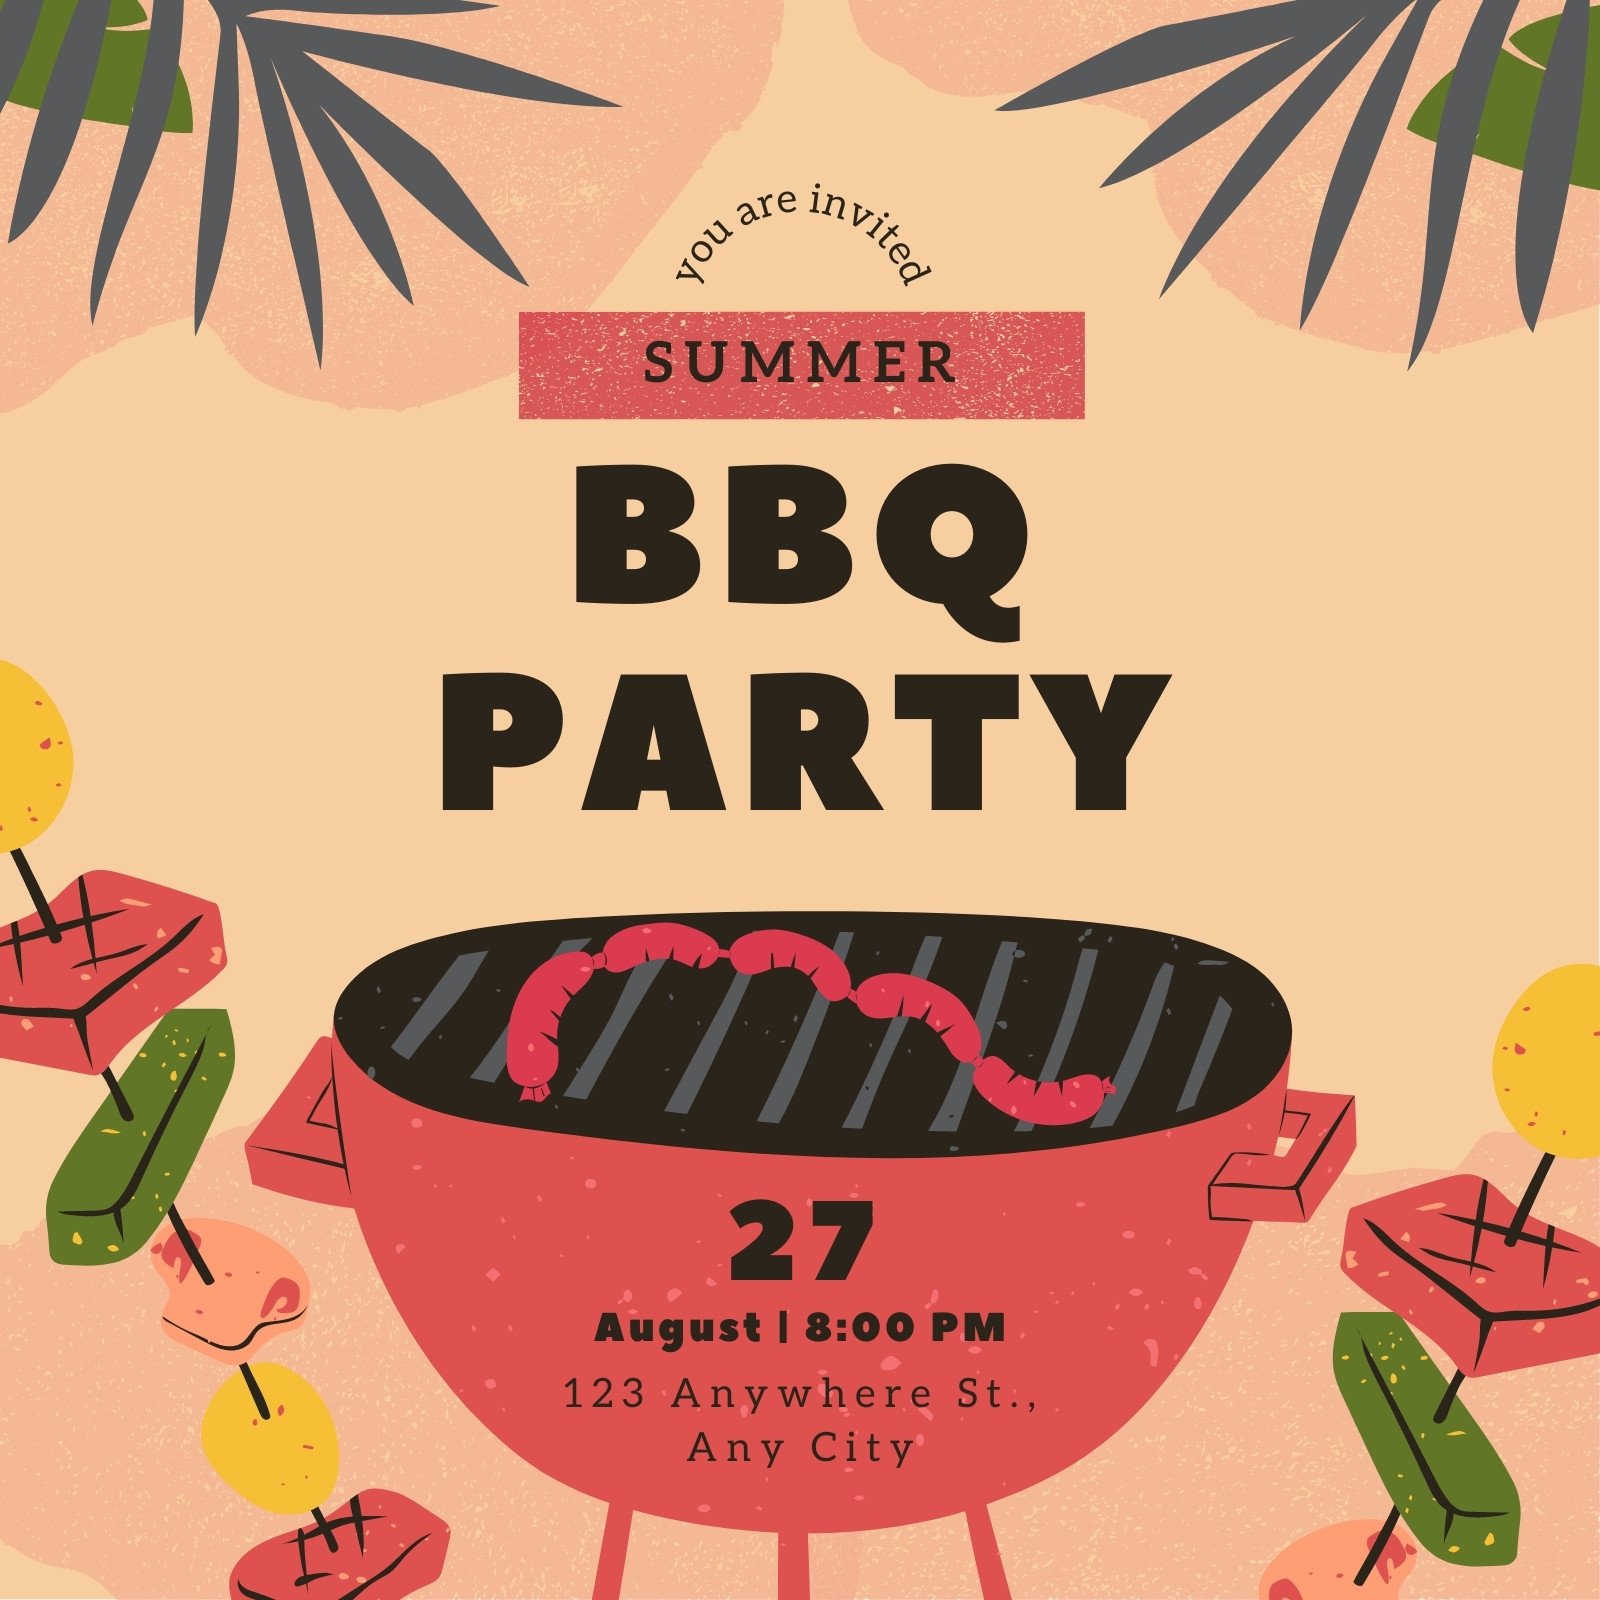 Bbq invitation template free download python download pdf from url